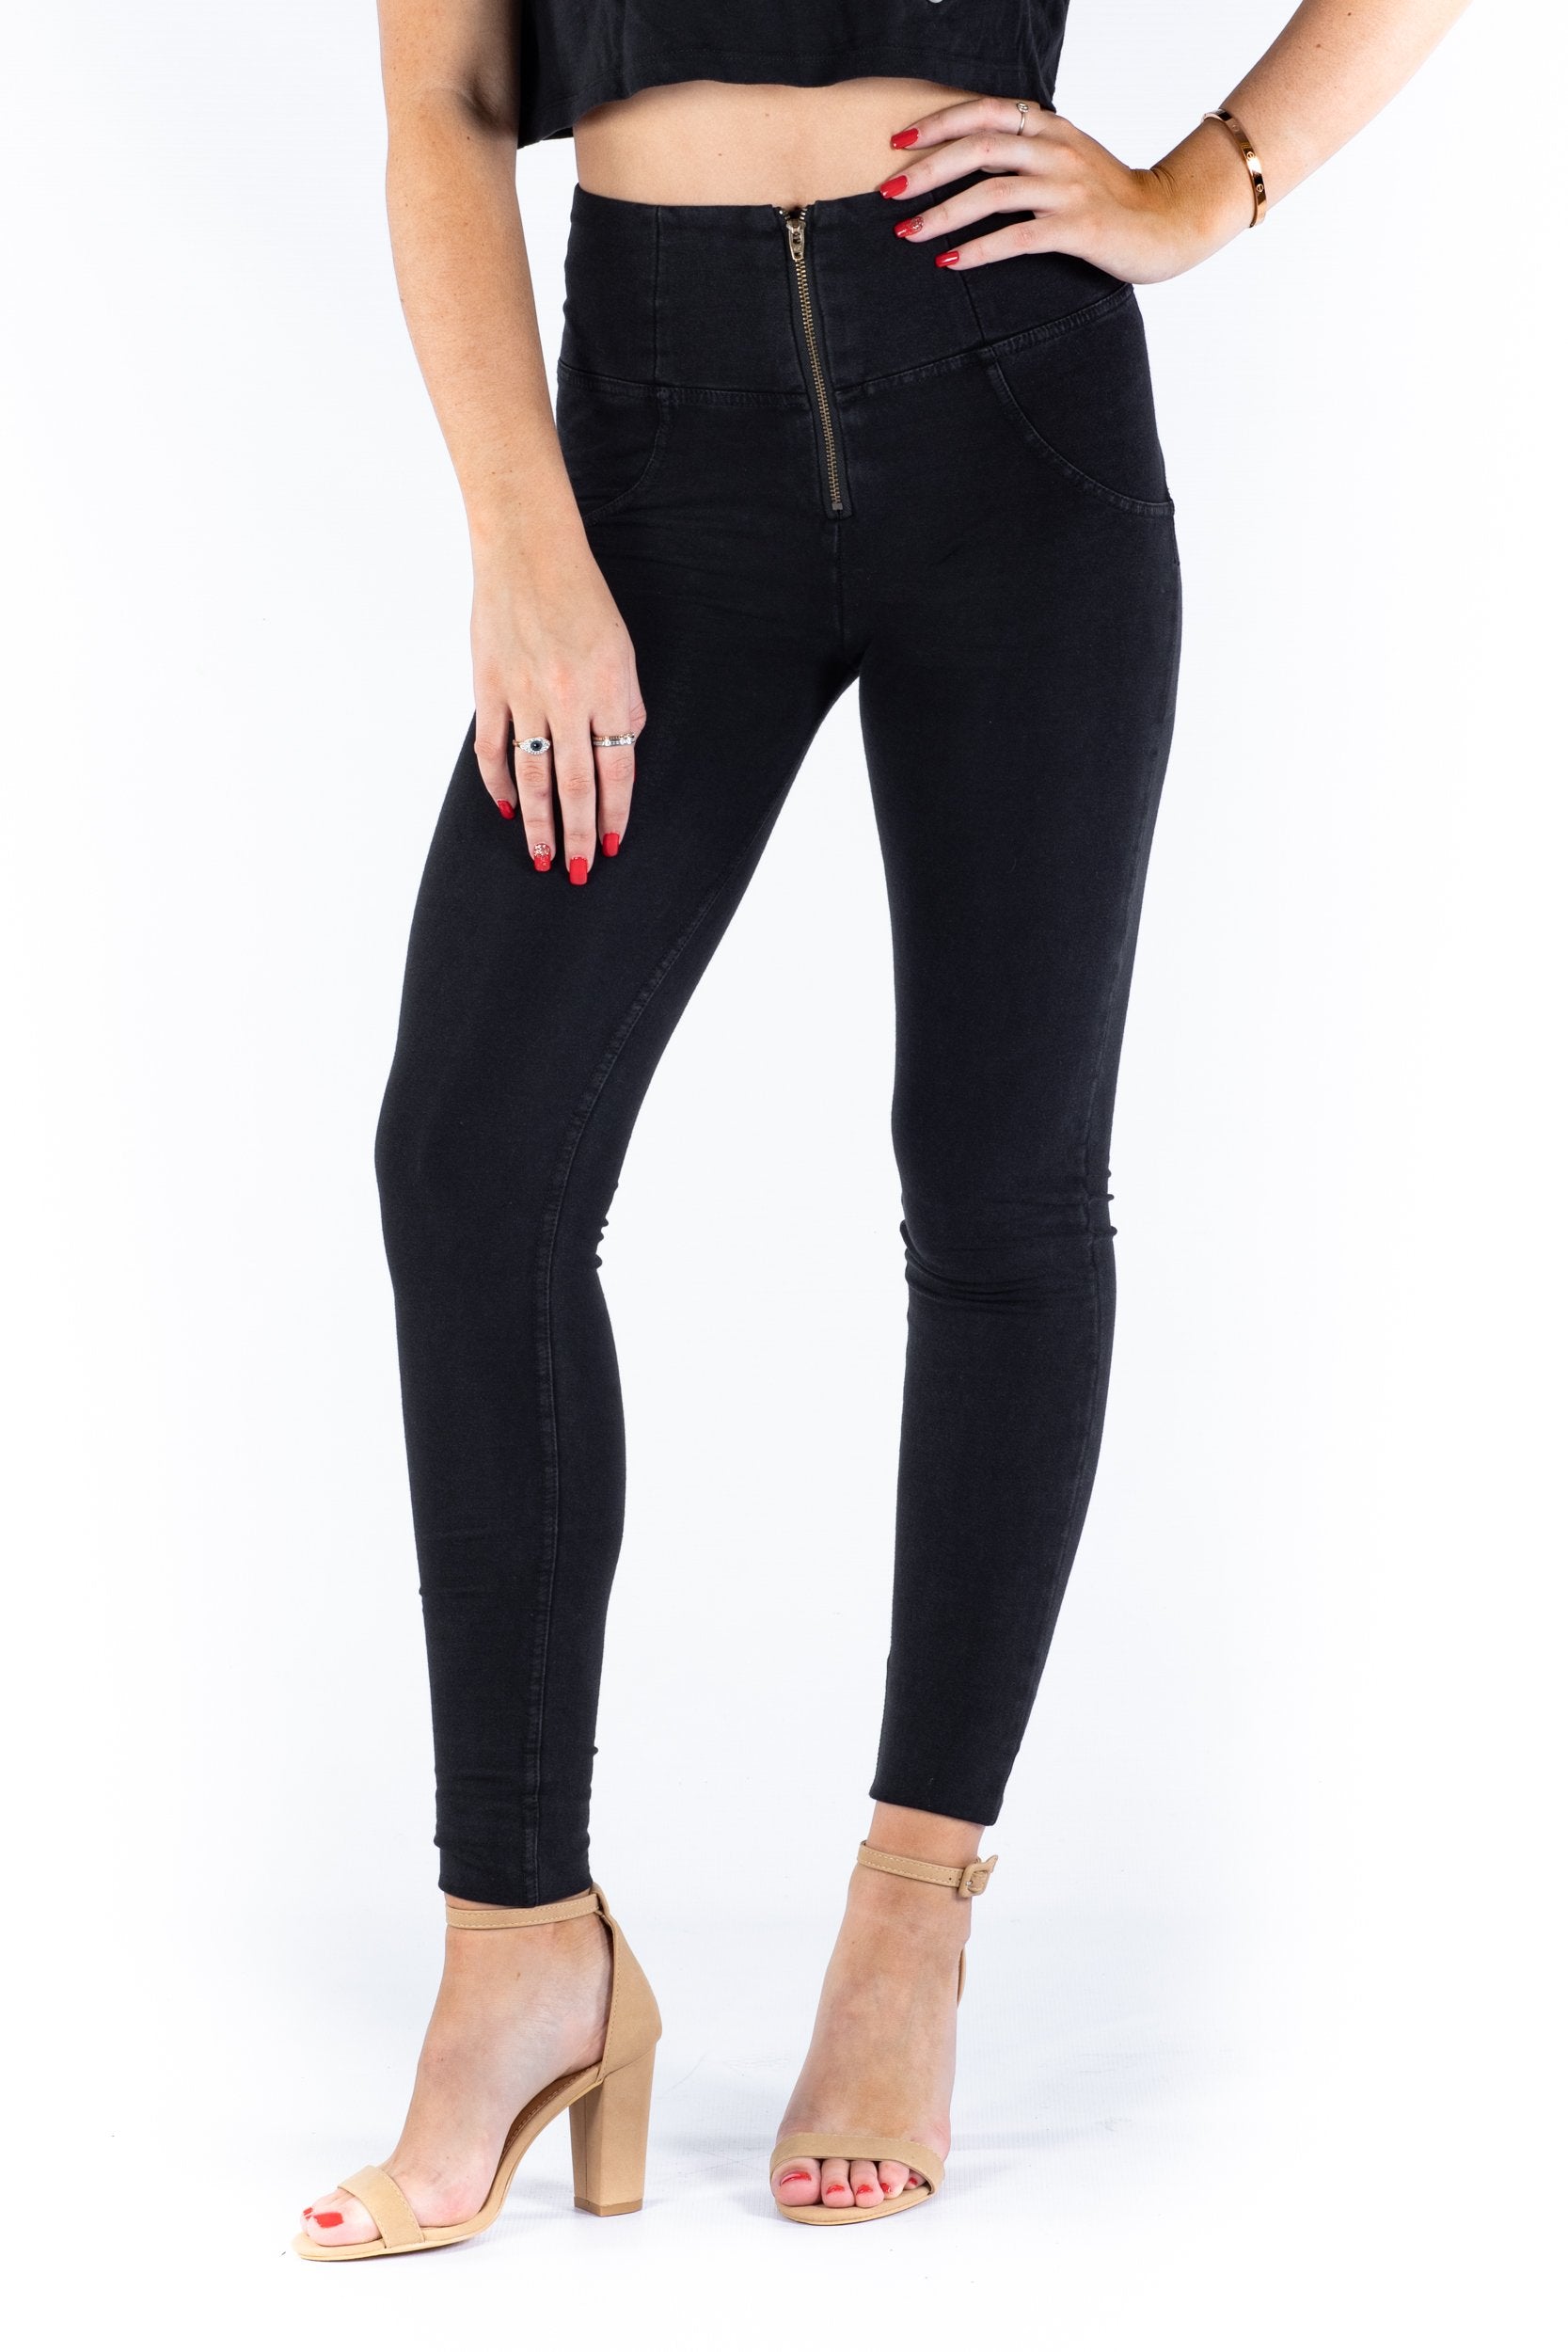 Women's Jeans, Pants, Leggings, and Dresses for Every Occasion – Wonderfit  Australia